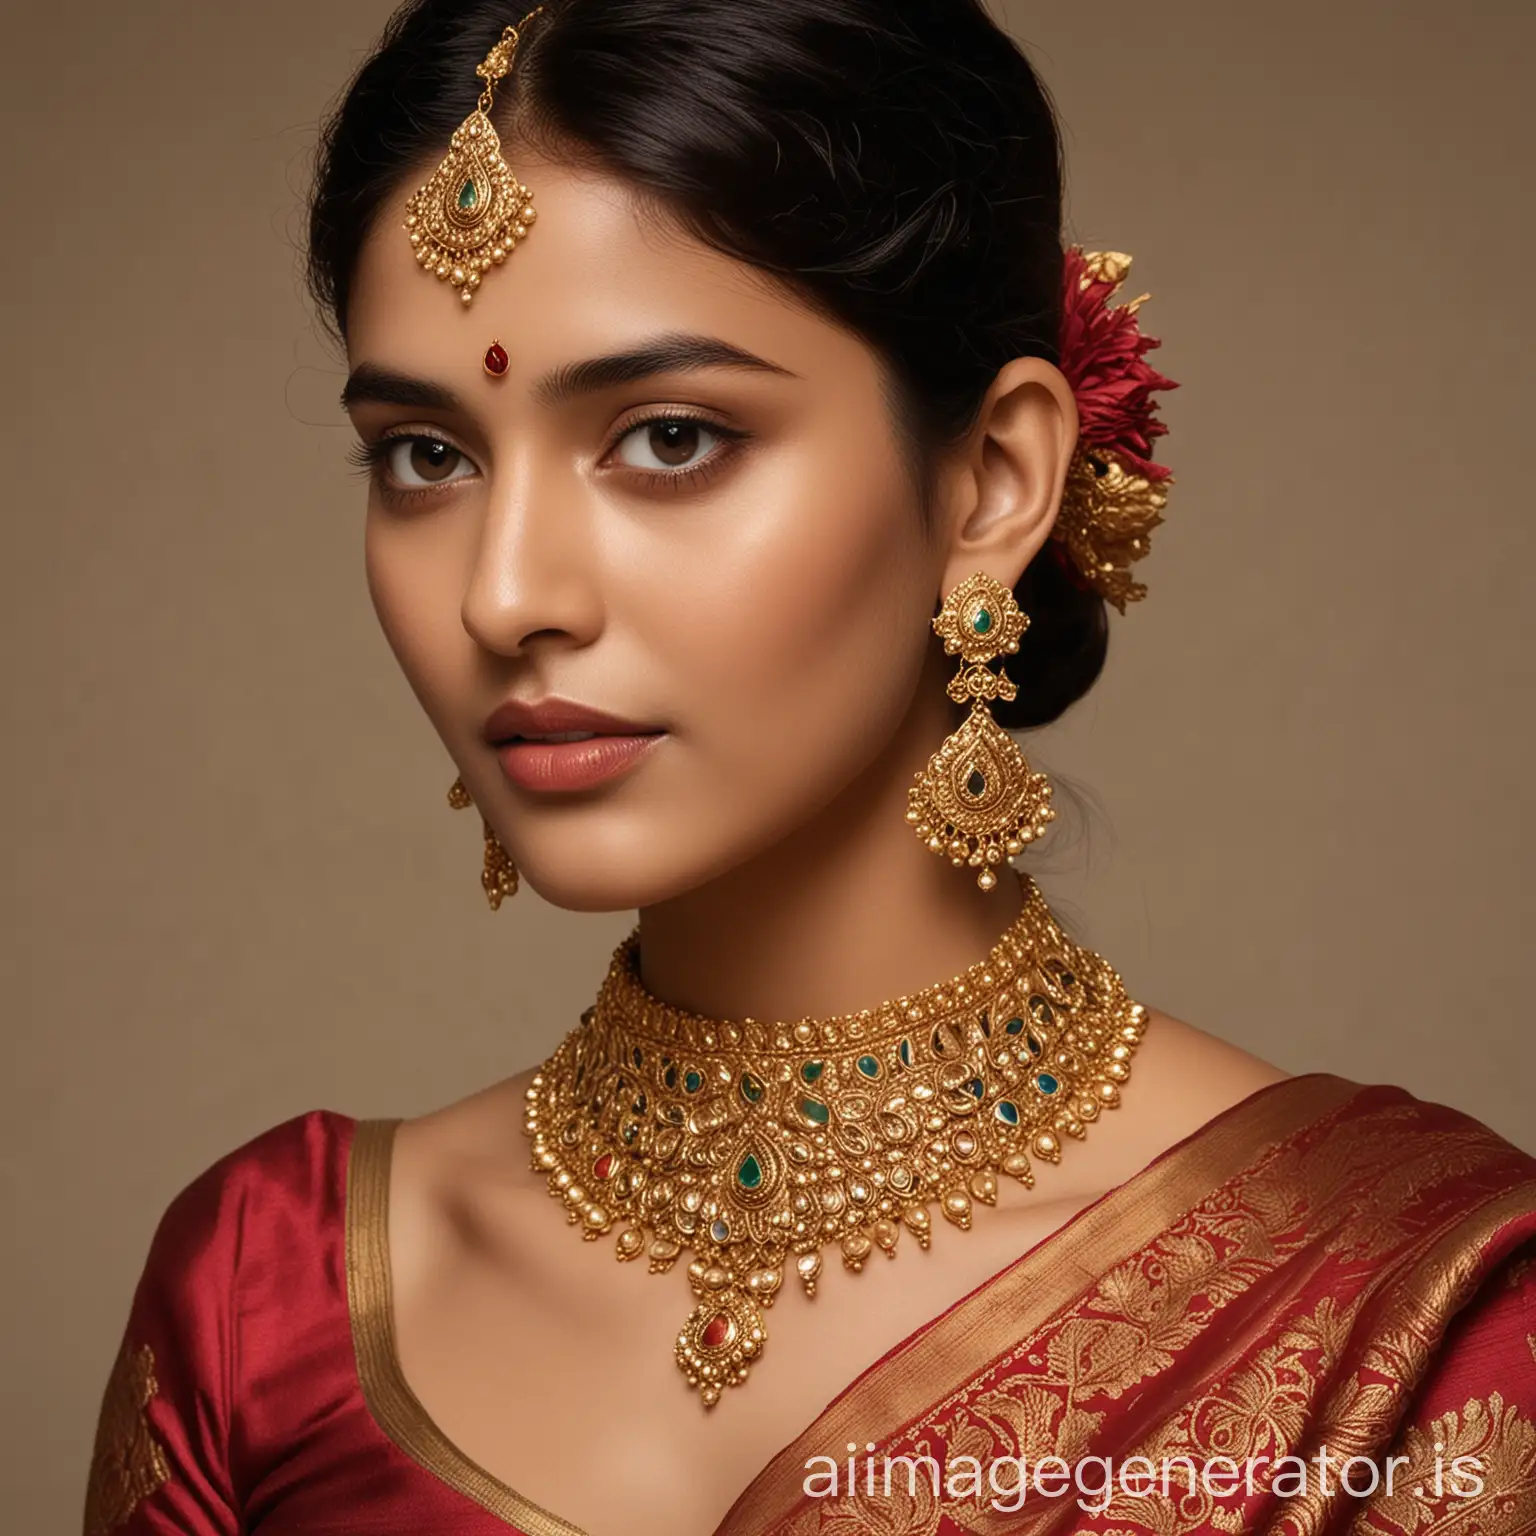 Create a captivating image featuring a South Indian woman adorned in exquisite gold jewelry, radiating grace, elegance, and sophistication. Showcase her wearing stunning necklaces, intricate bangles, ornate earrings, and other traditional ornaments that celebrate India's rich cultural heritage. Emphasize the beauty of the jewelry against her traditional attire, capturing the essence of timeless charm and opulence. Pay attention to detail, from the intricate designs of the jewelry to the delicate features of the model, ensuring every element reflects the allure of India's gold jewelry tradition